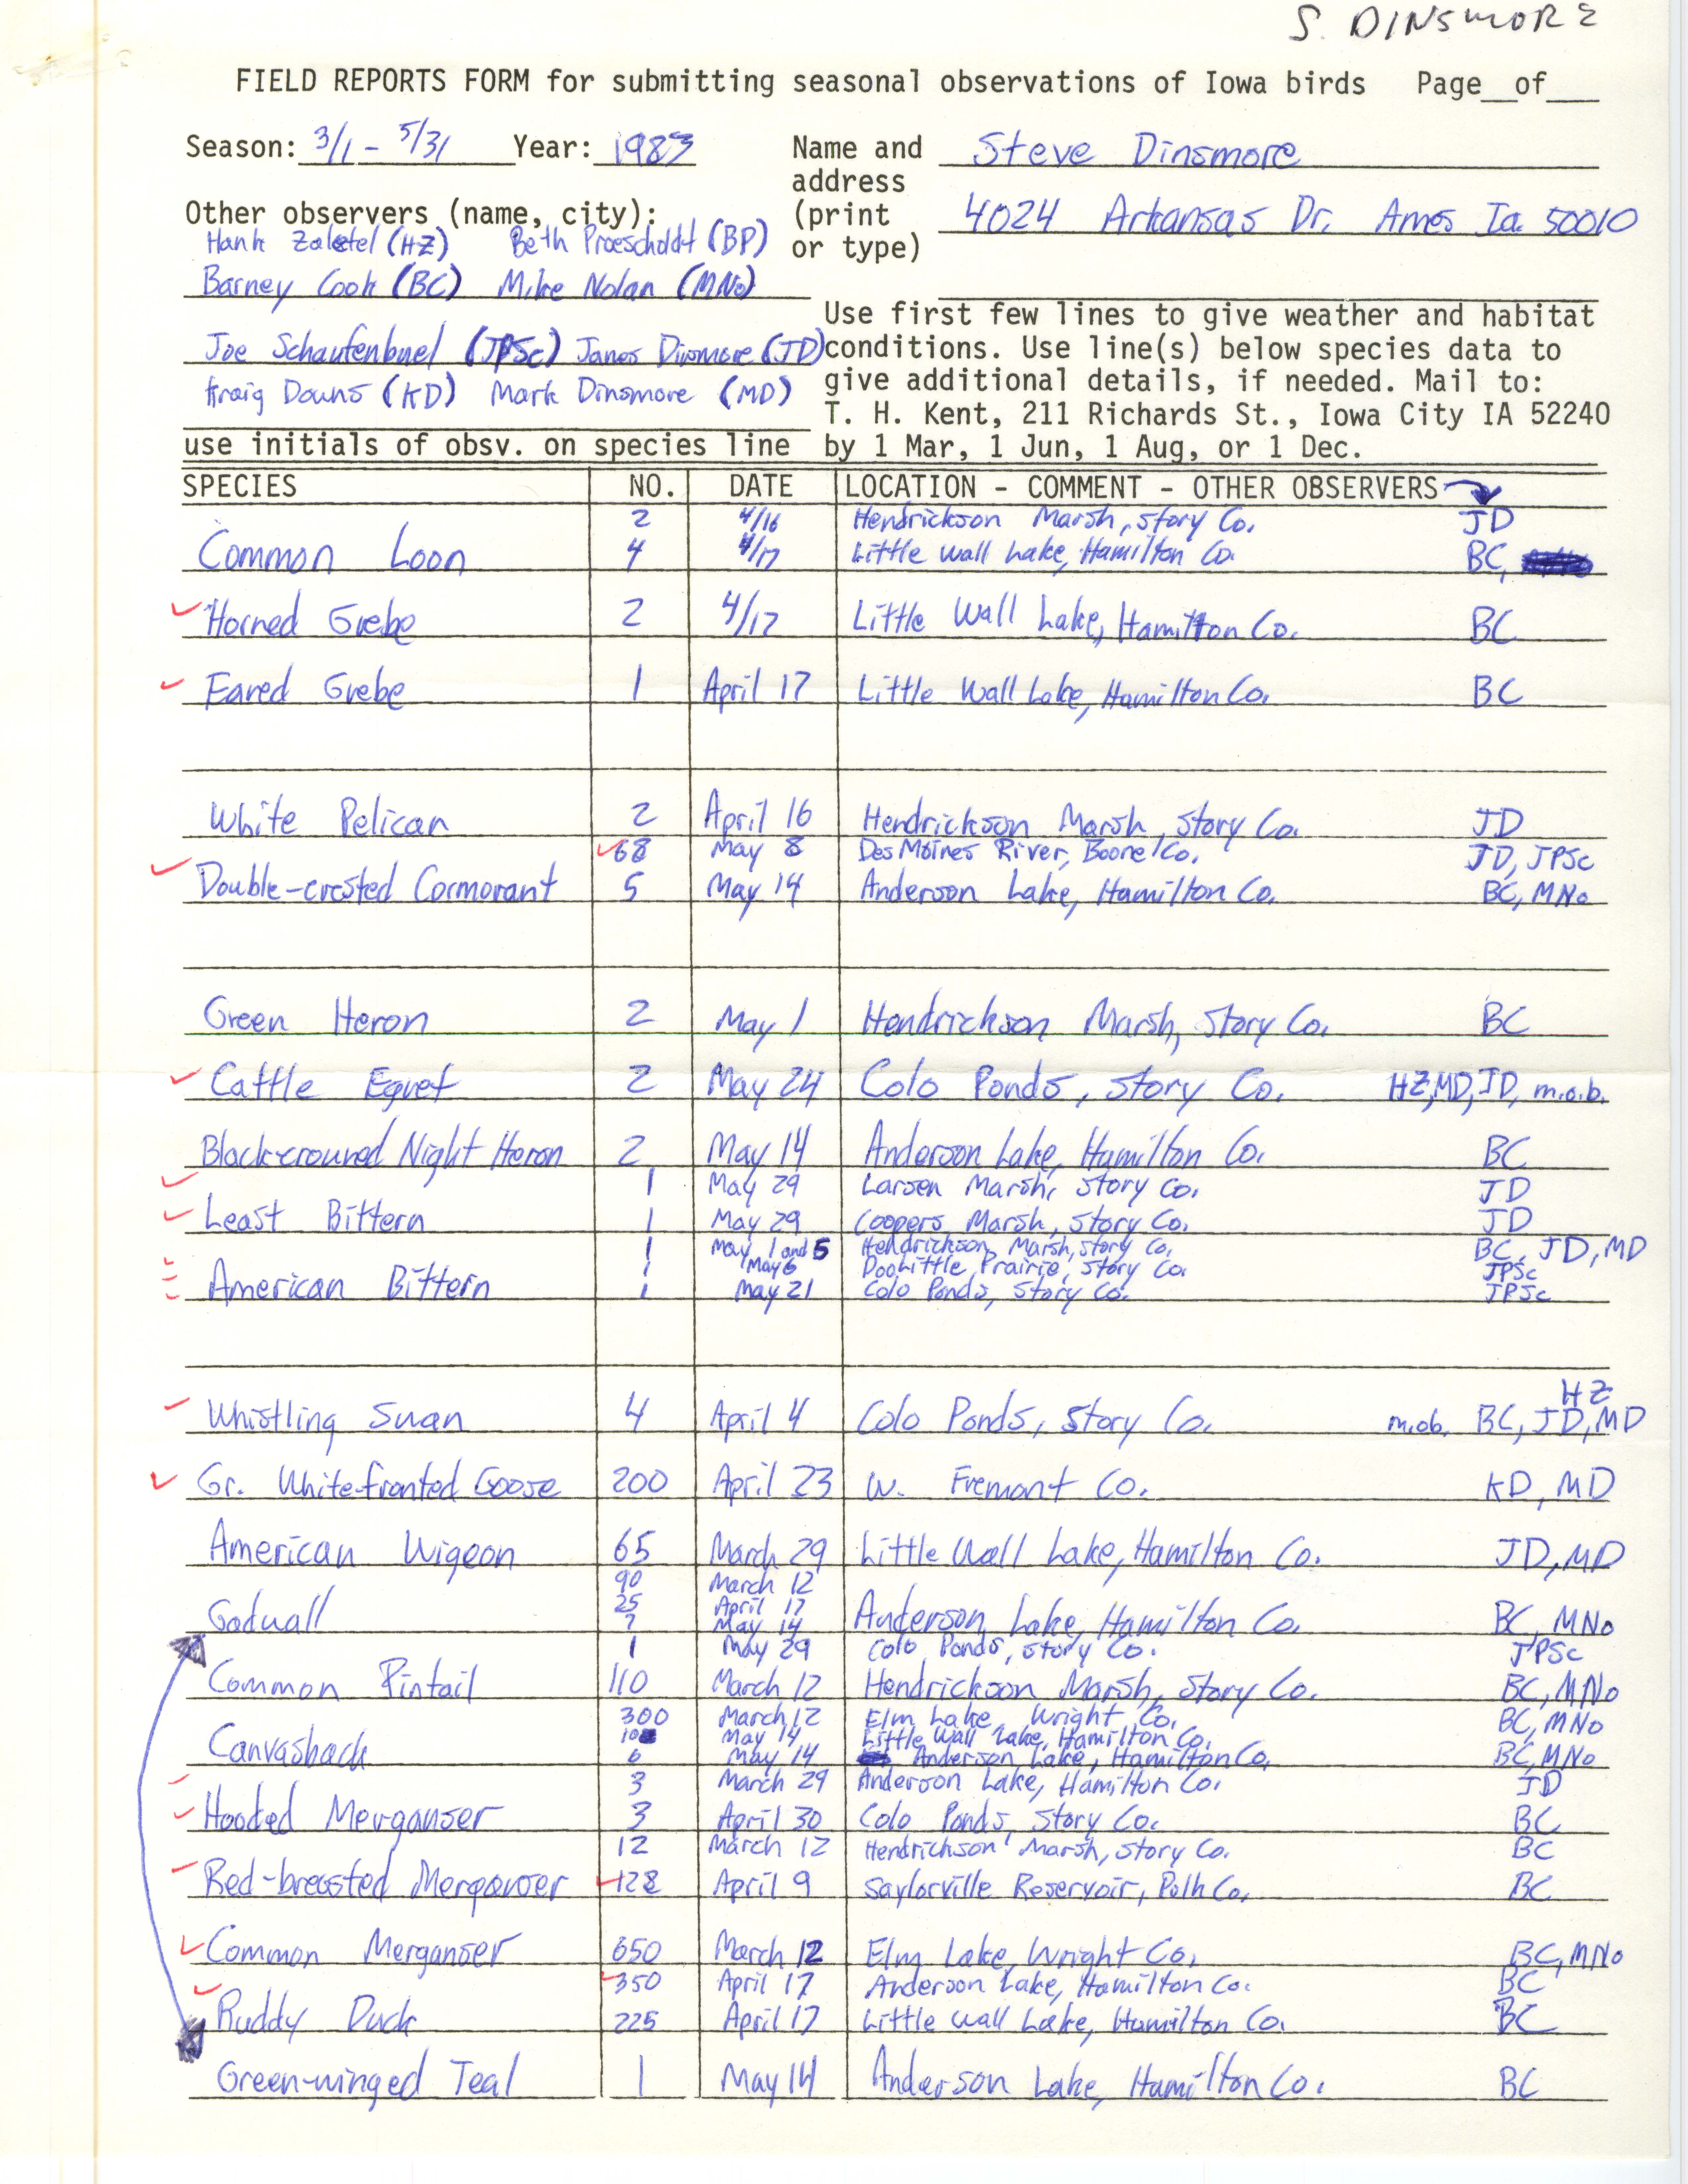 Field reports form for submitting seasonal observations of Iowa birds, Stephen J. Dinsmore, spring 1983